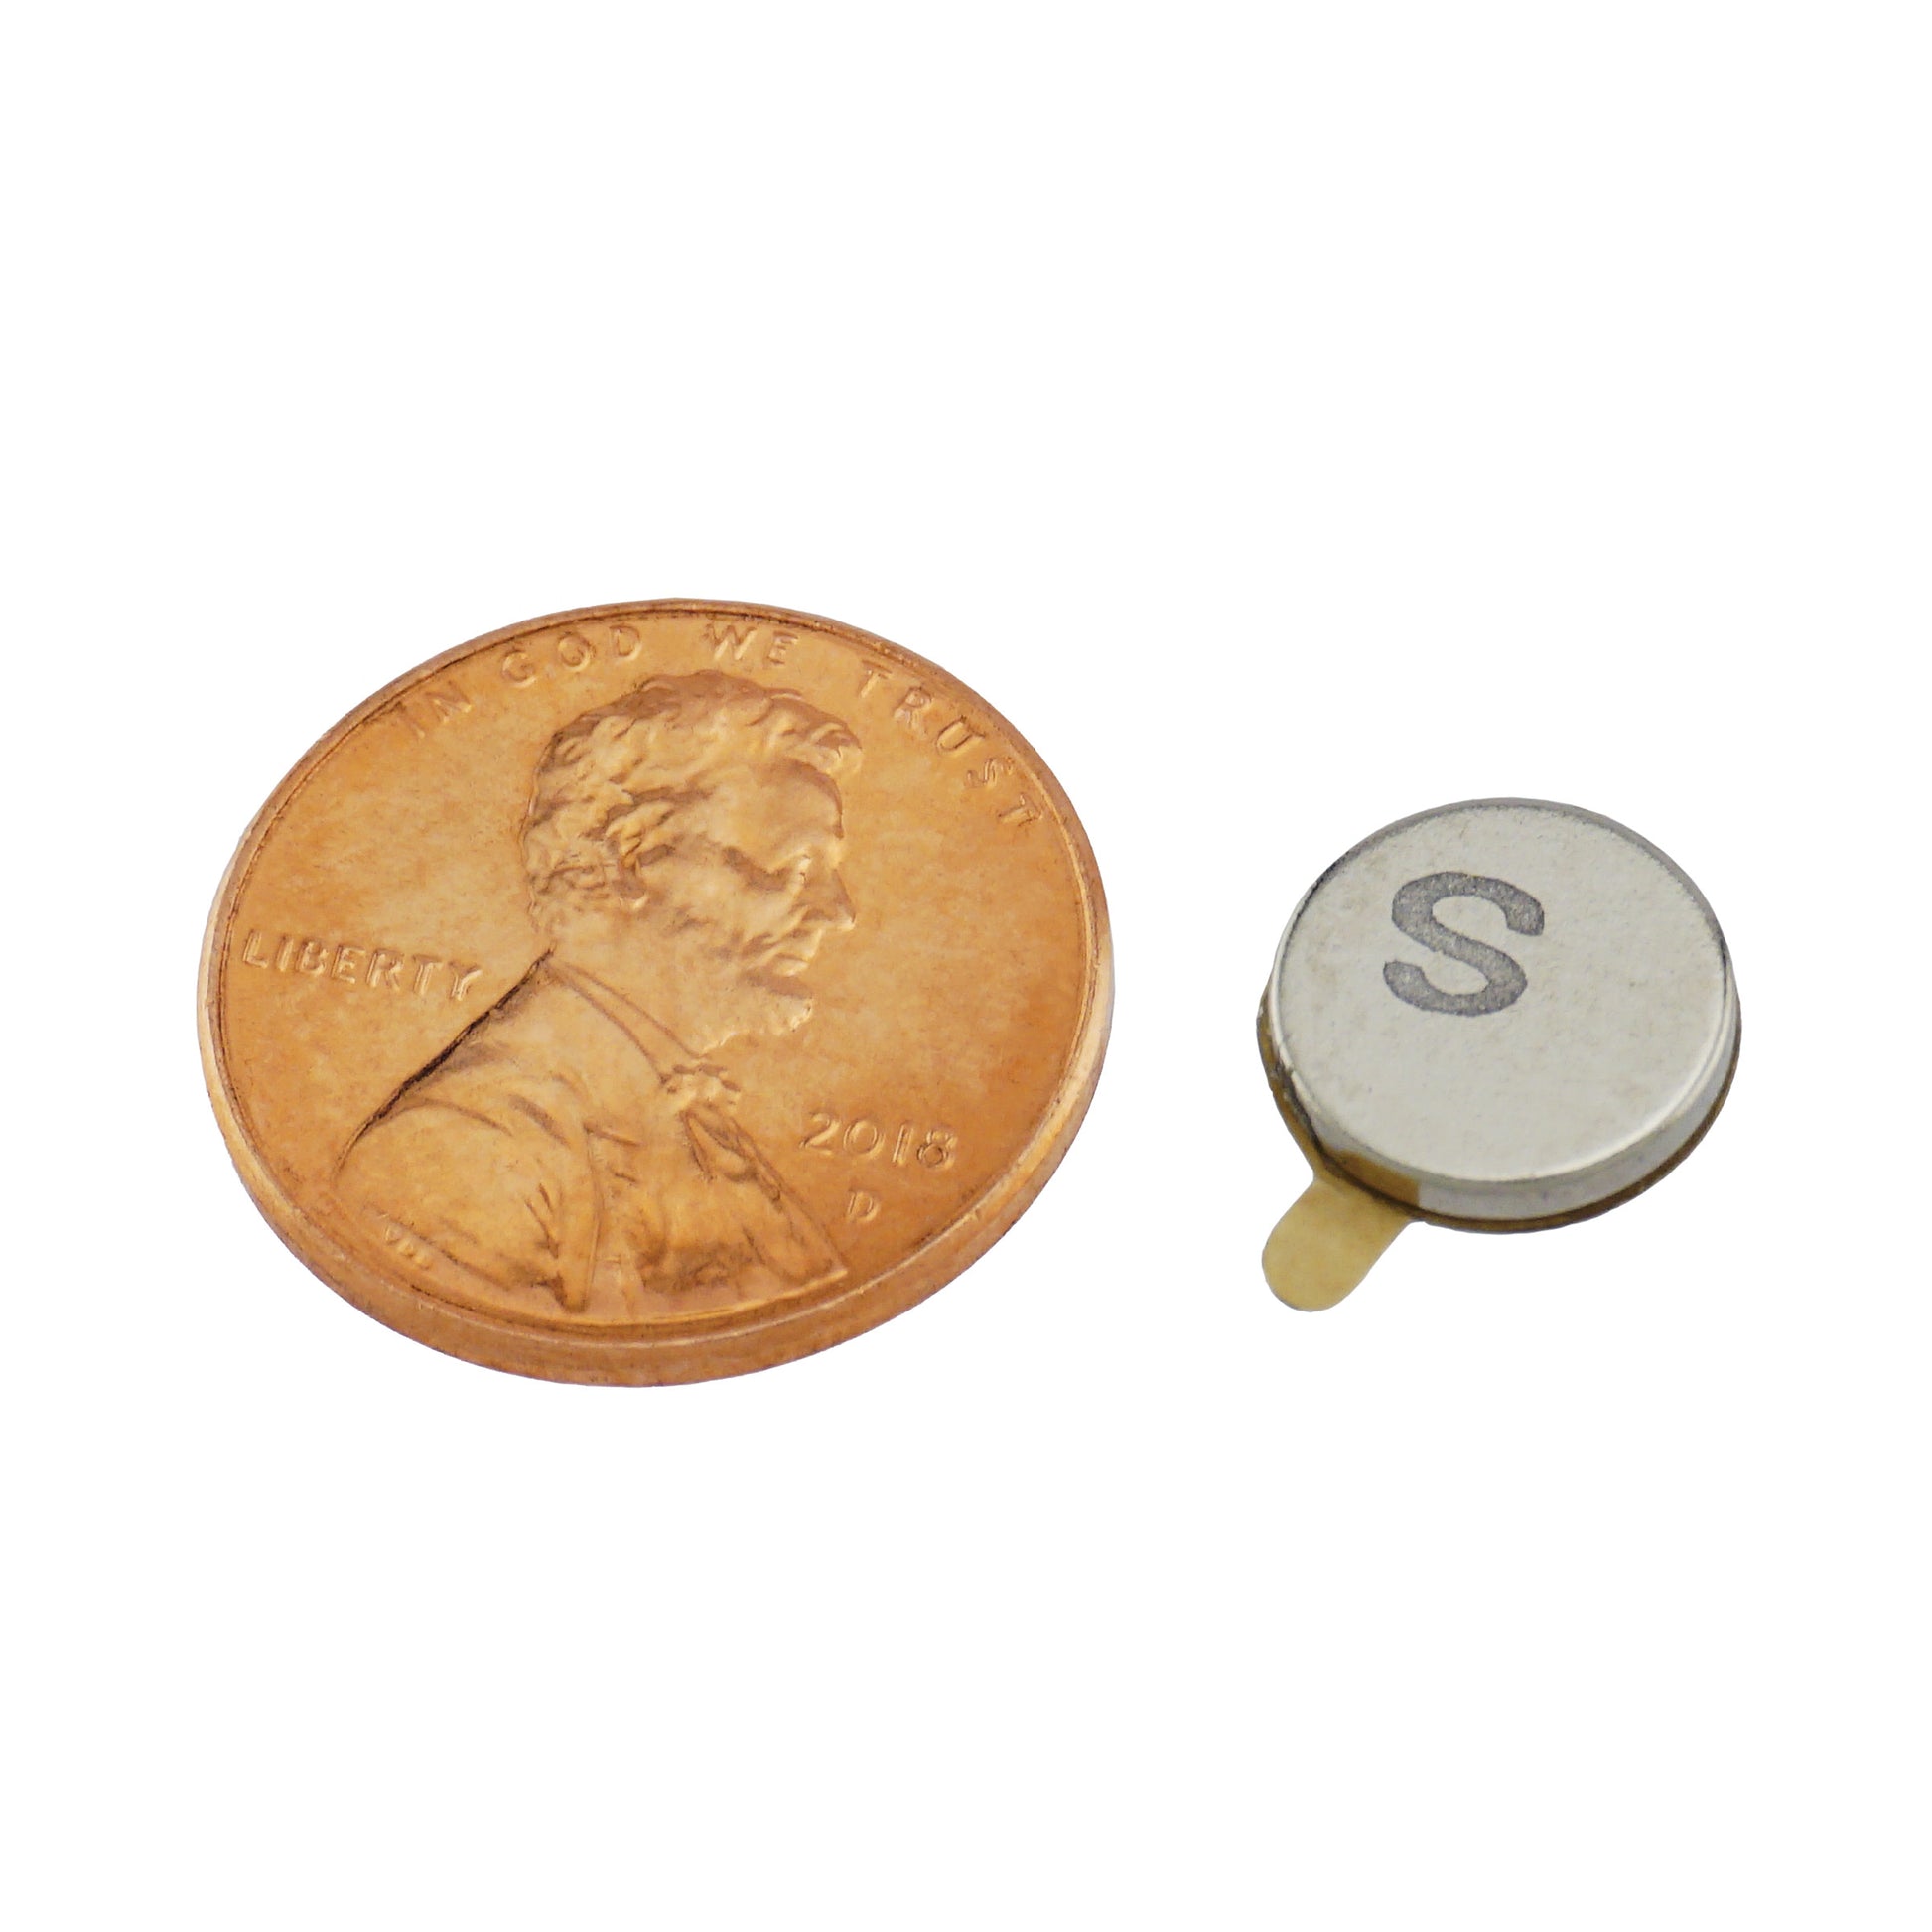 Load image into Gallery viewer, FTND37S Neodymium Disc Magnet with Adhesive - Compared to Penny for Size Reference